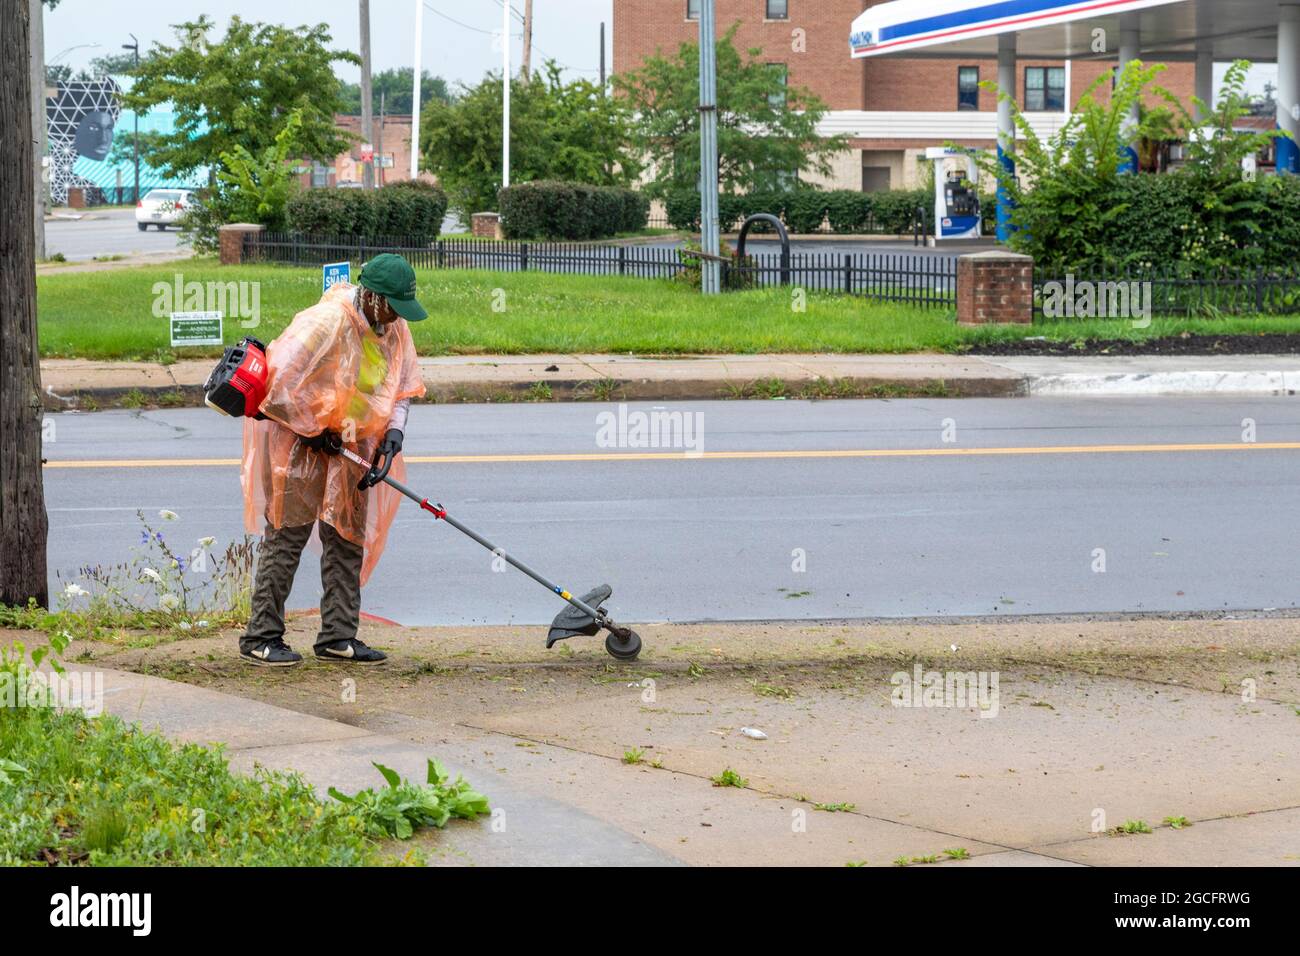 Detroit, Michigan - Volunteers with the MorningSide Community Organiztion remove weeds from a small park on the edge of their neighborhood. The were w Stock Photo